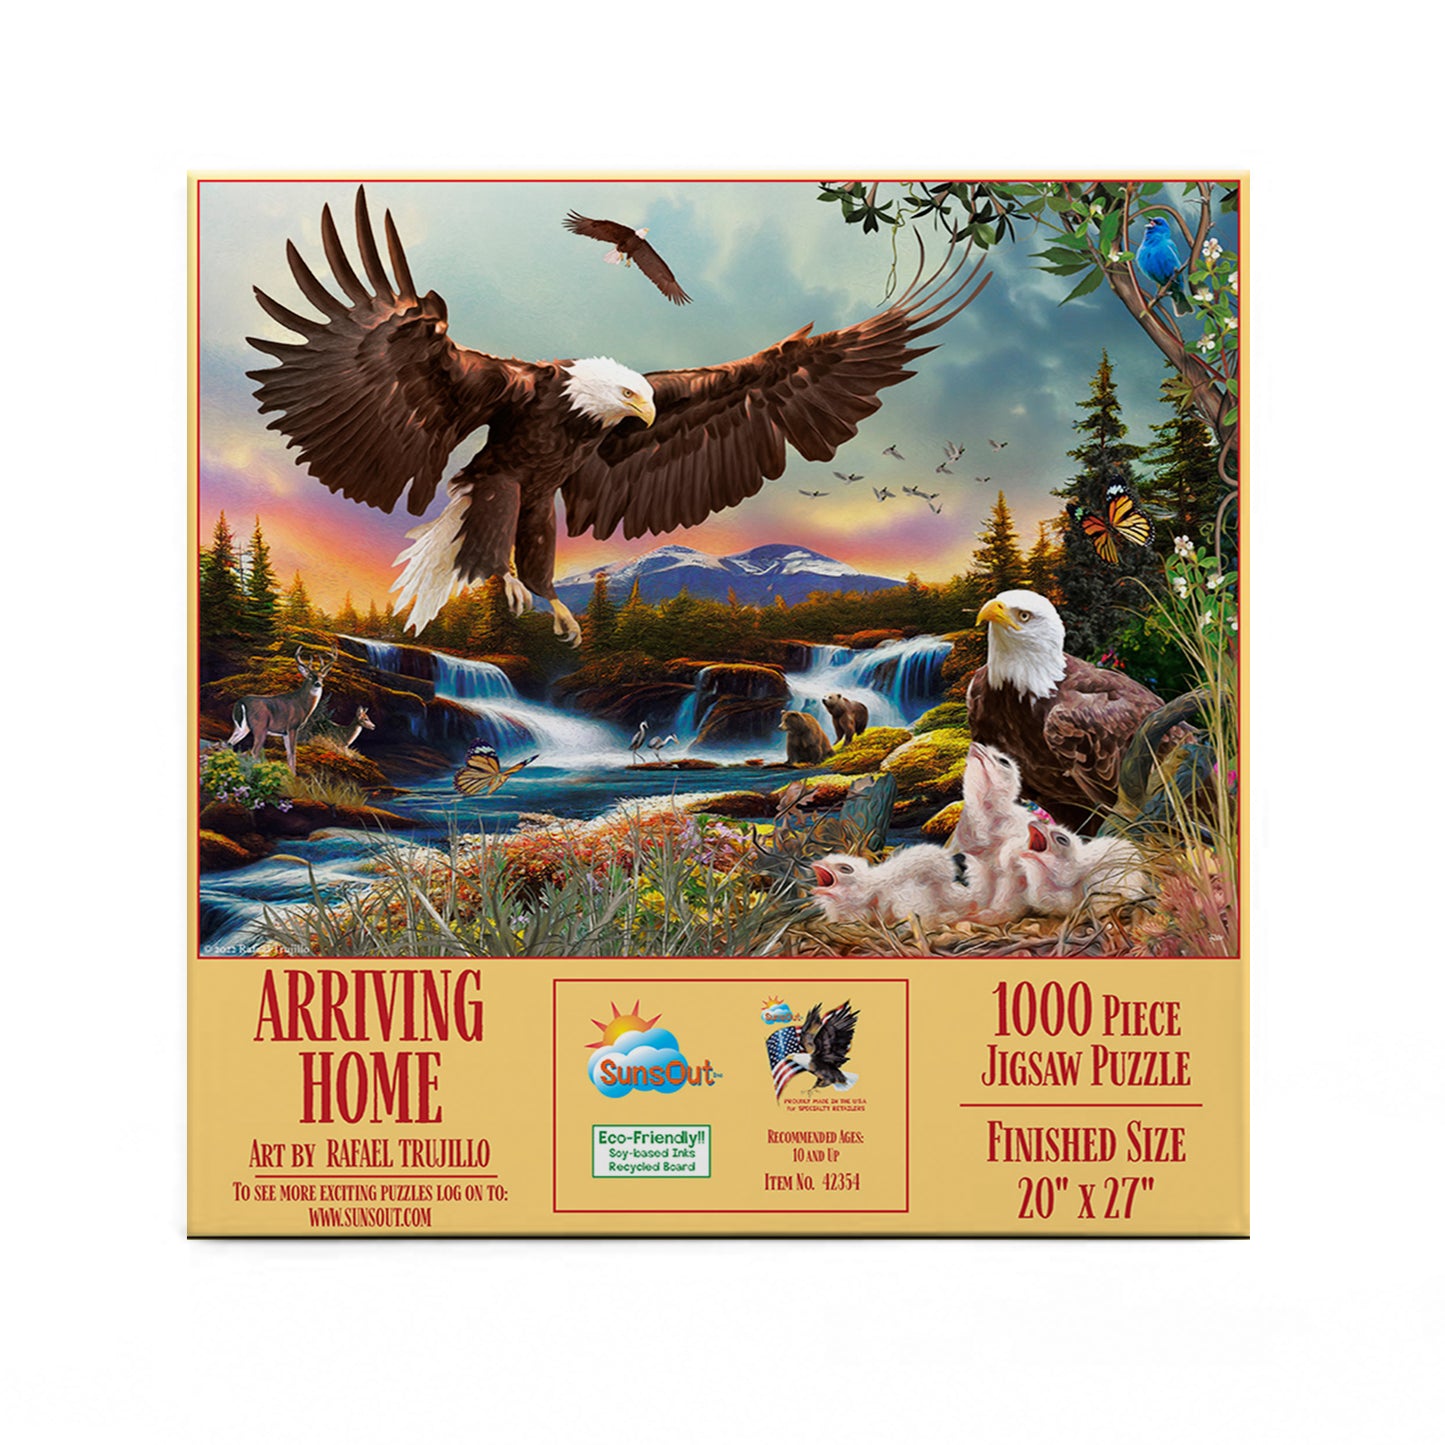 Arriving Home - 1000 Piece Jigsaw Puzzle